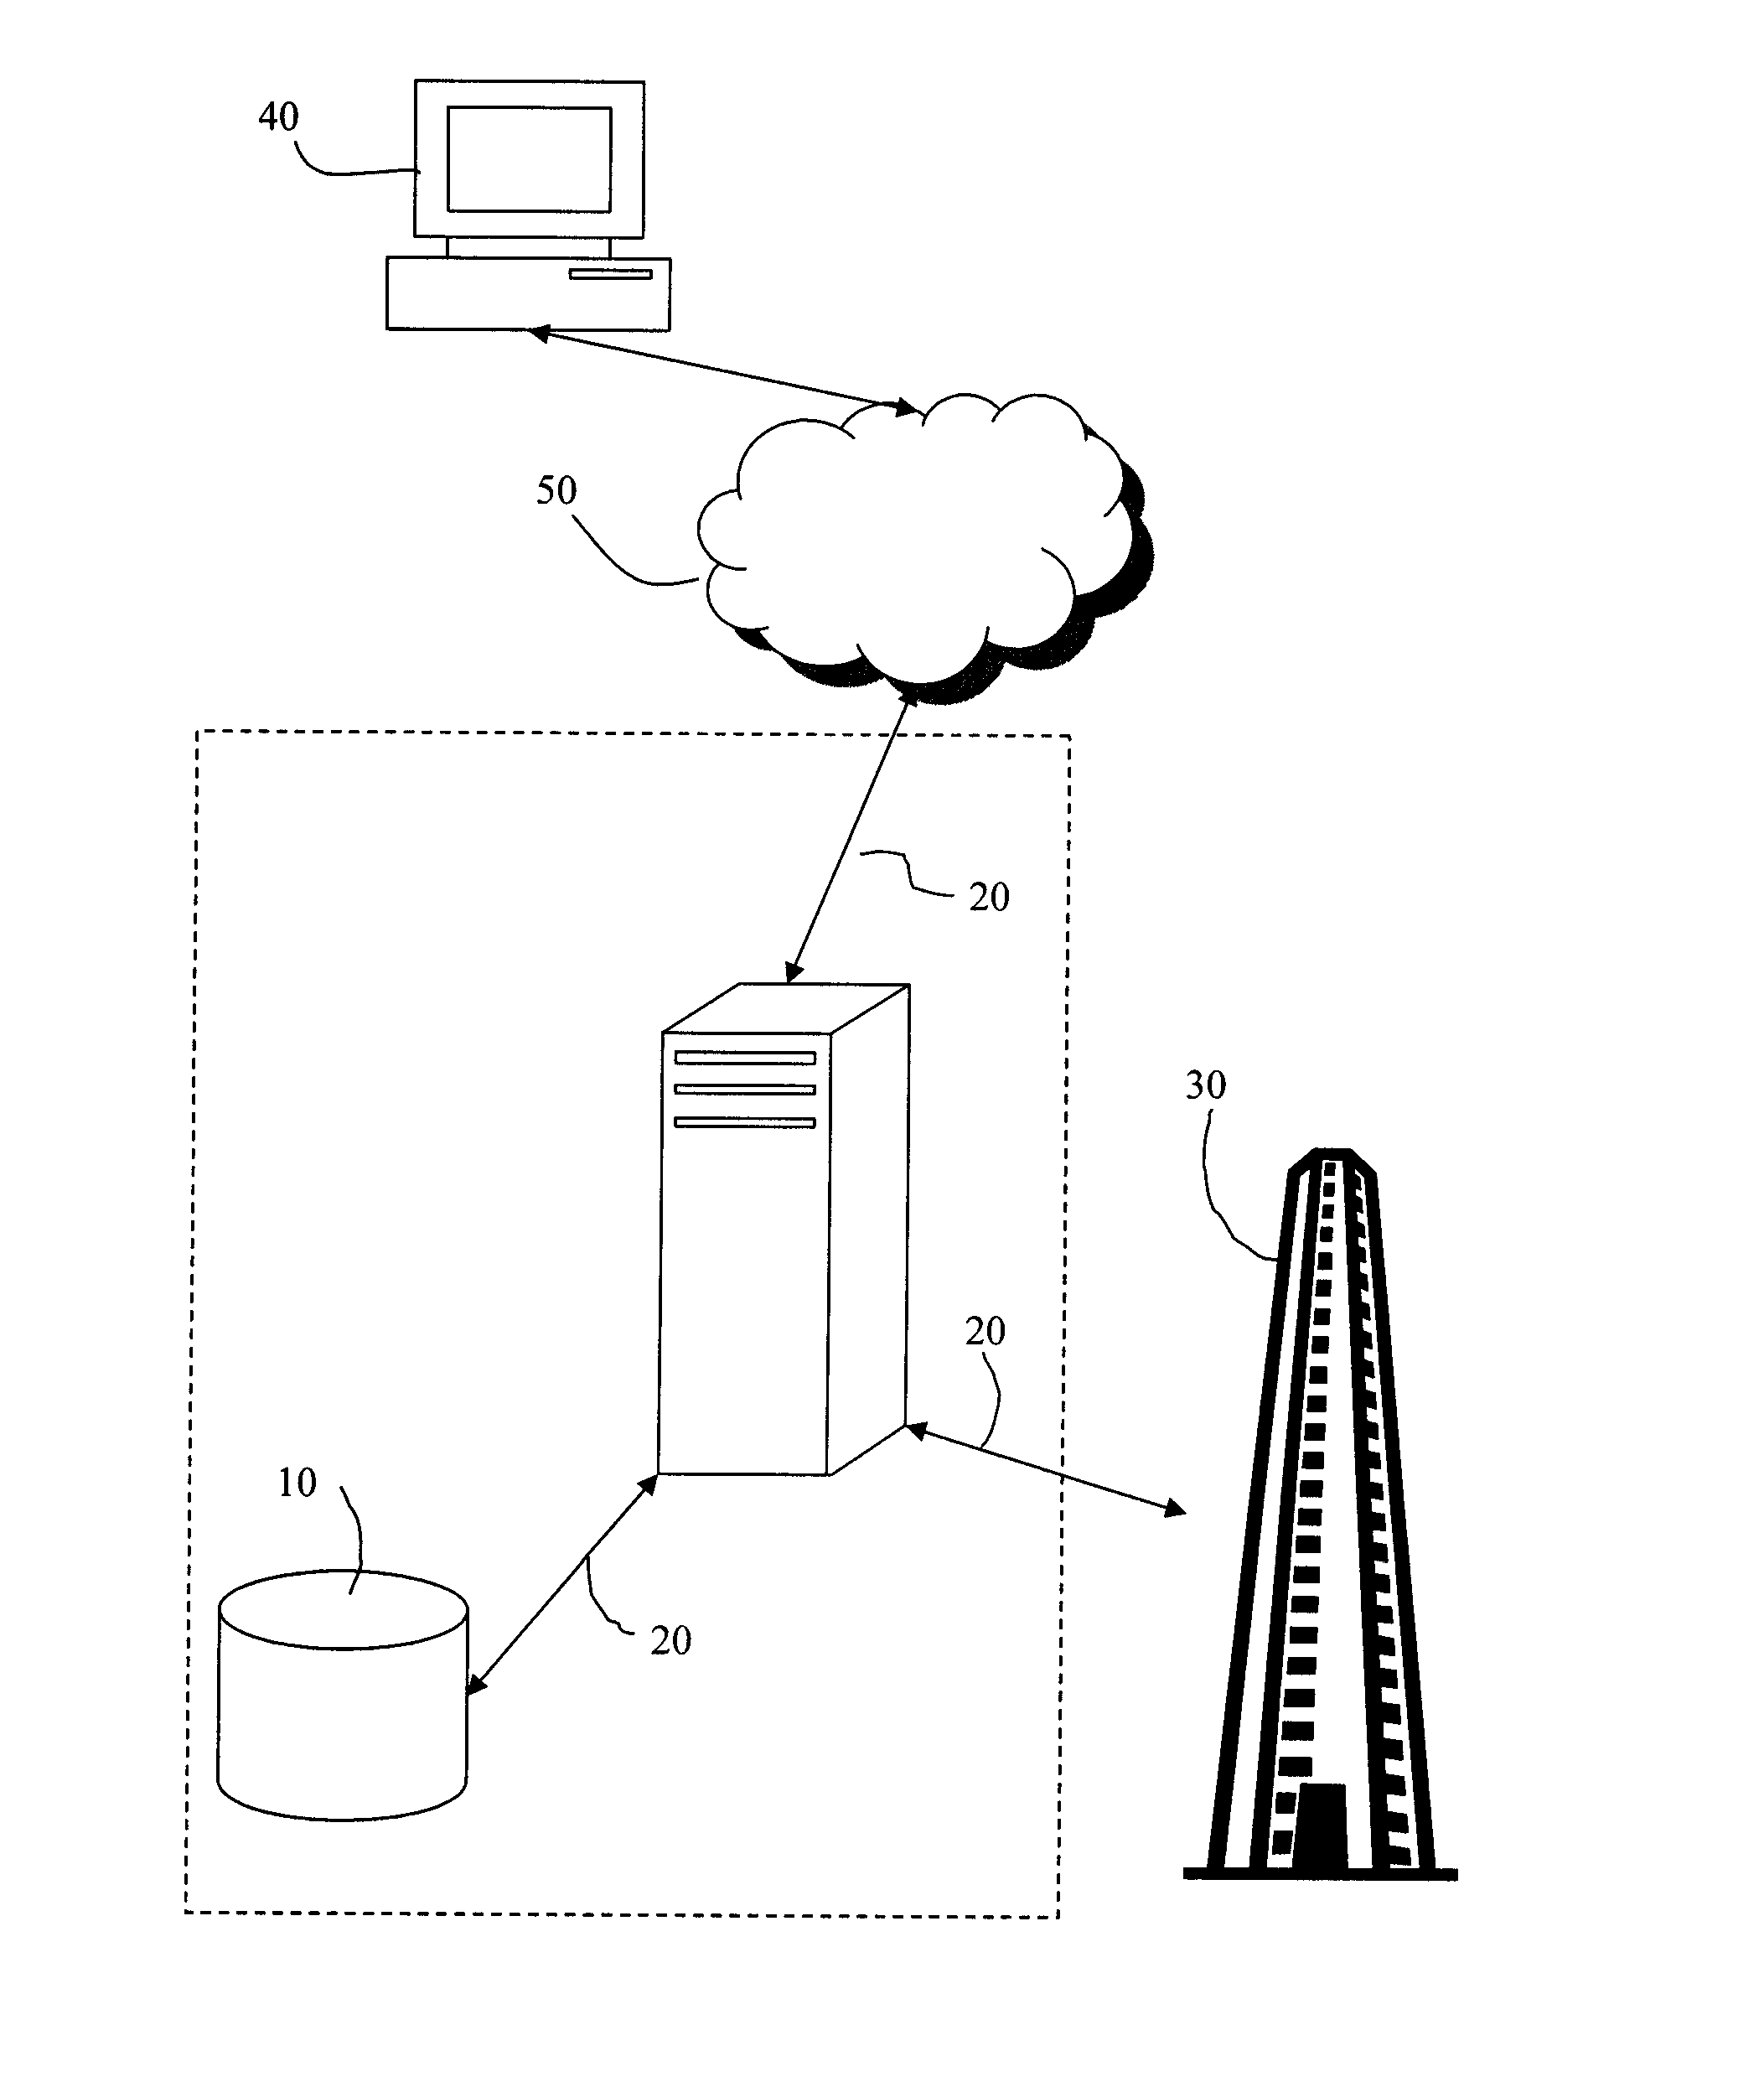 System and method for managing buildings